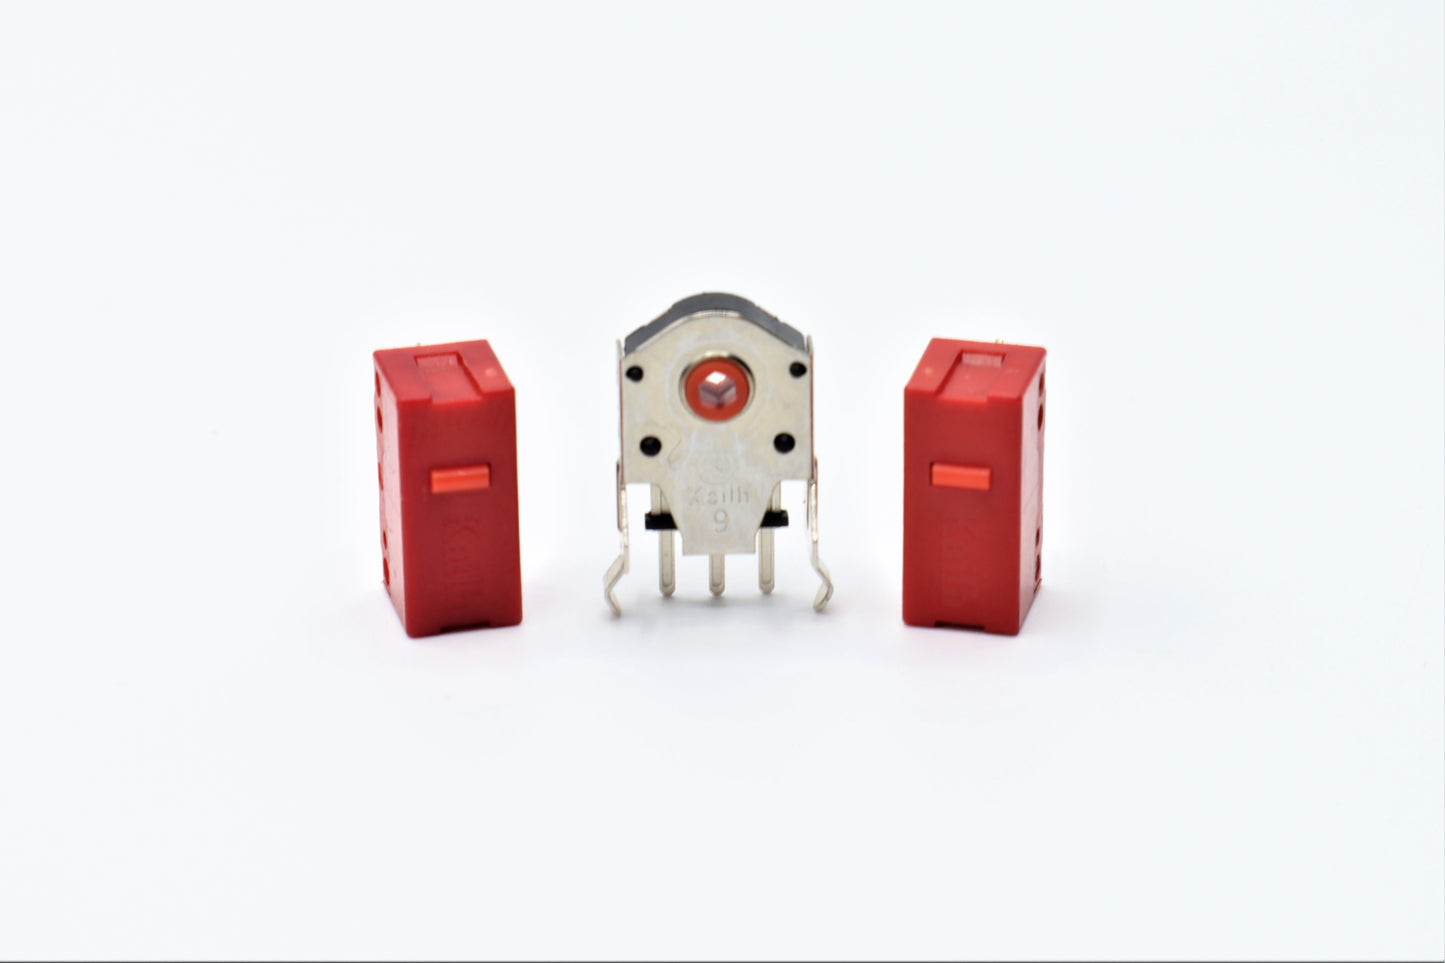 Kailh Red GM 4.0 Switches, Kailh Red Encoder